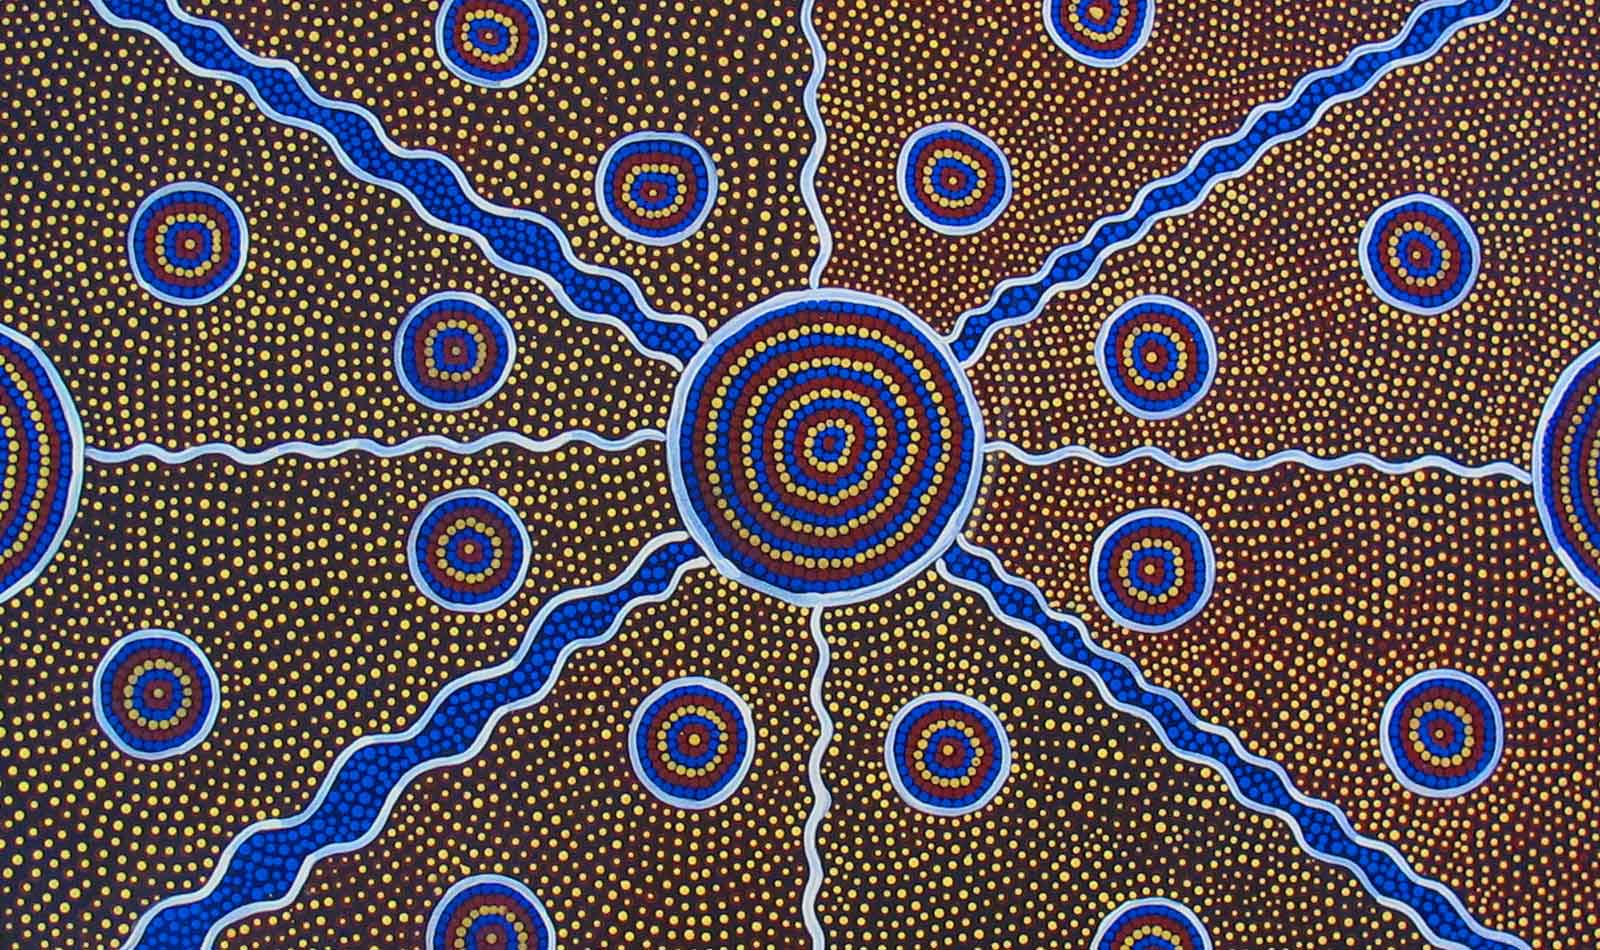 Ways You Can Support Indigenous Australians Today